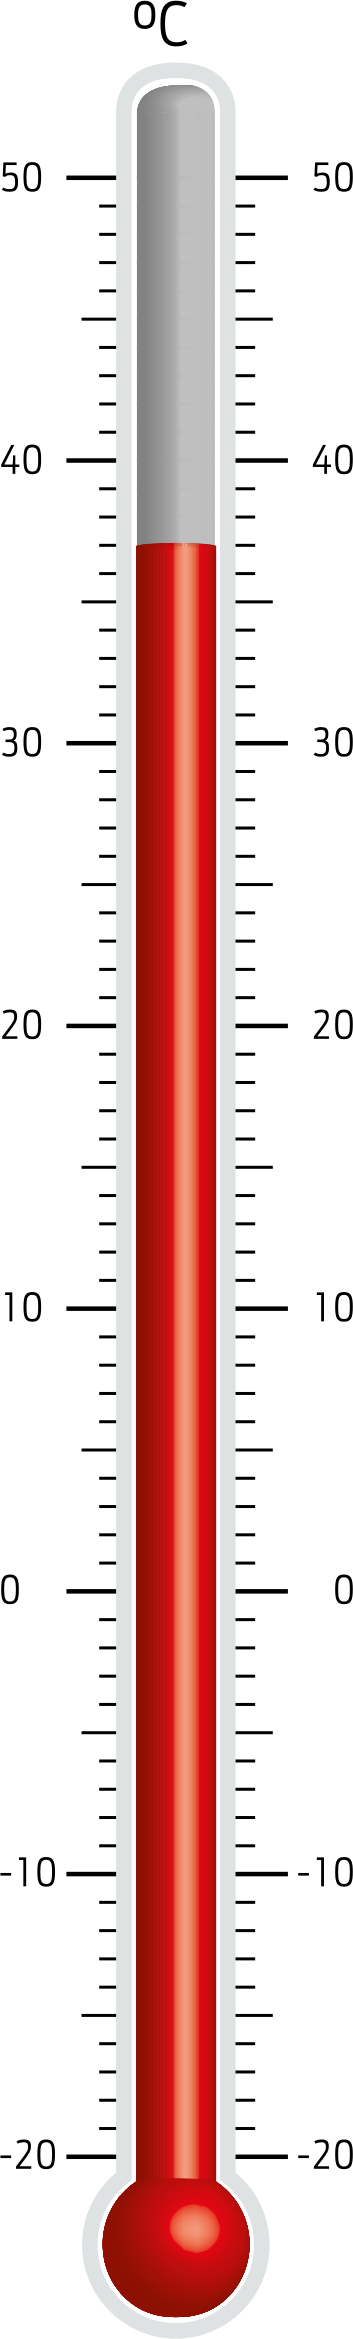 Clipart - Celsius Thermometer